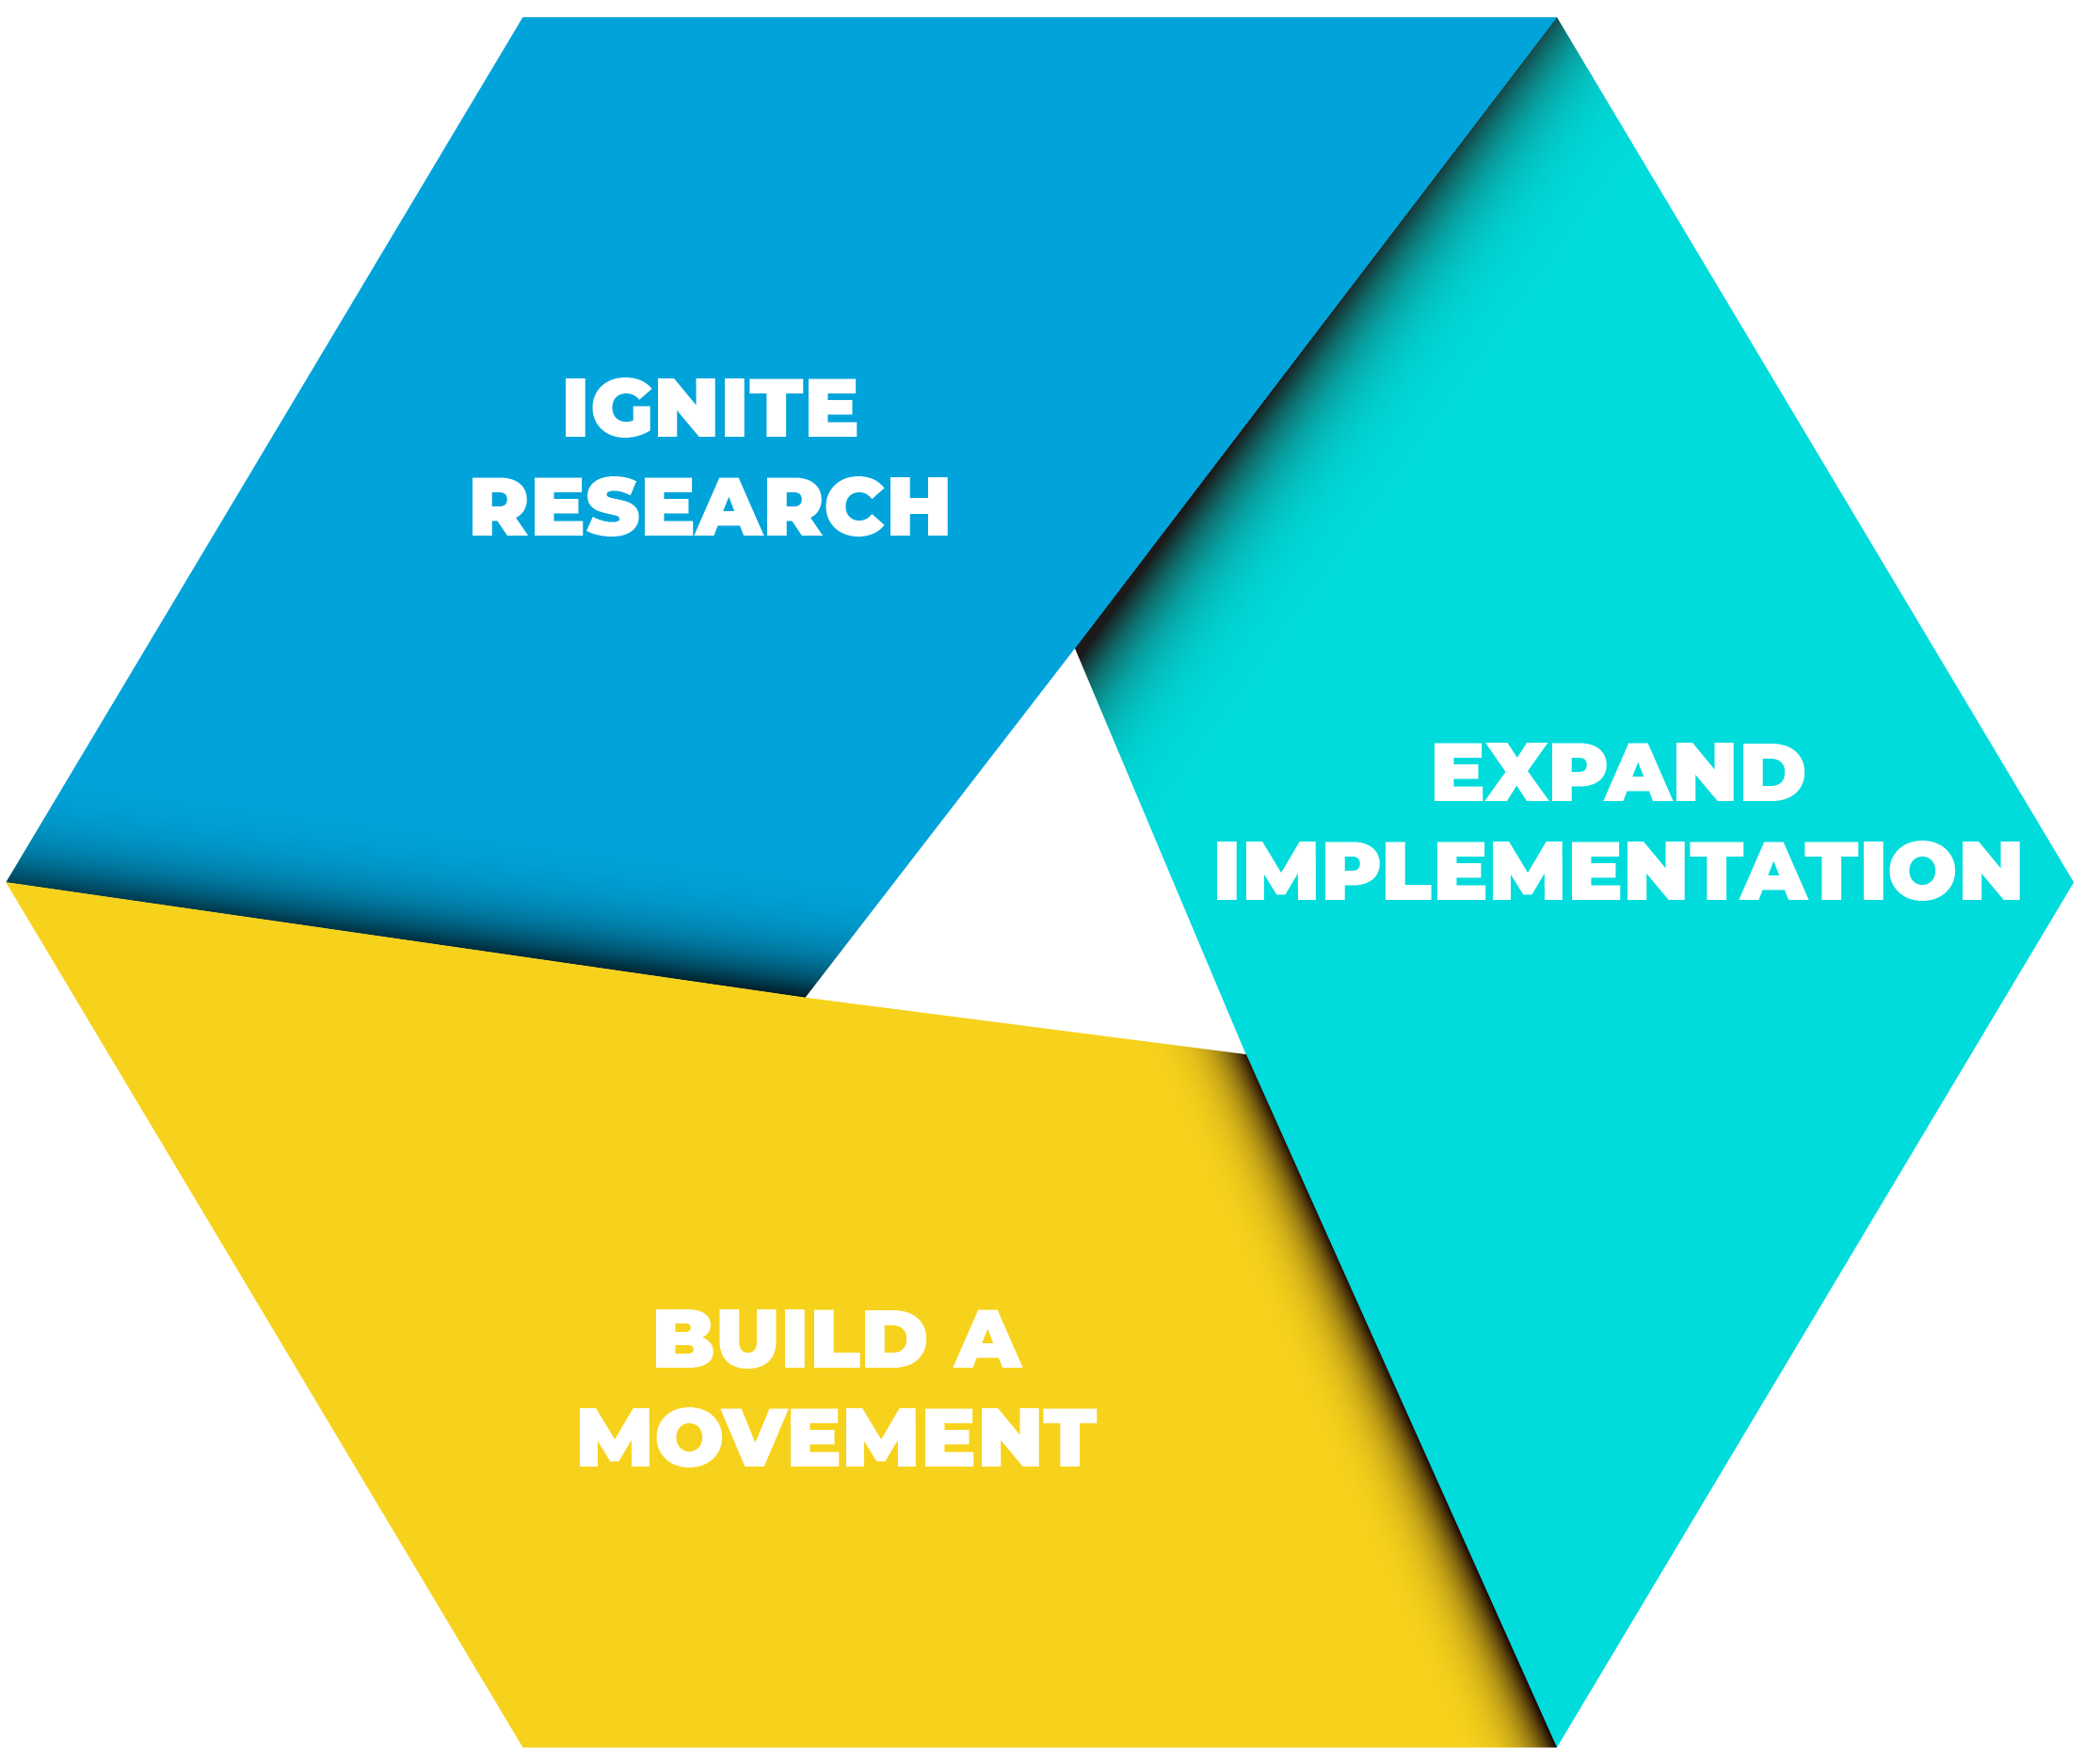 Readability Matters Strategies: Ignite Research, Expand Implementation, Build a Movement